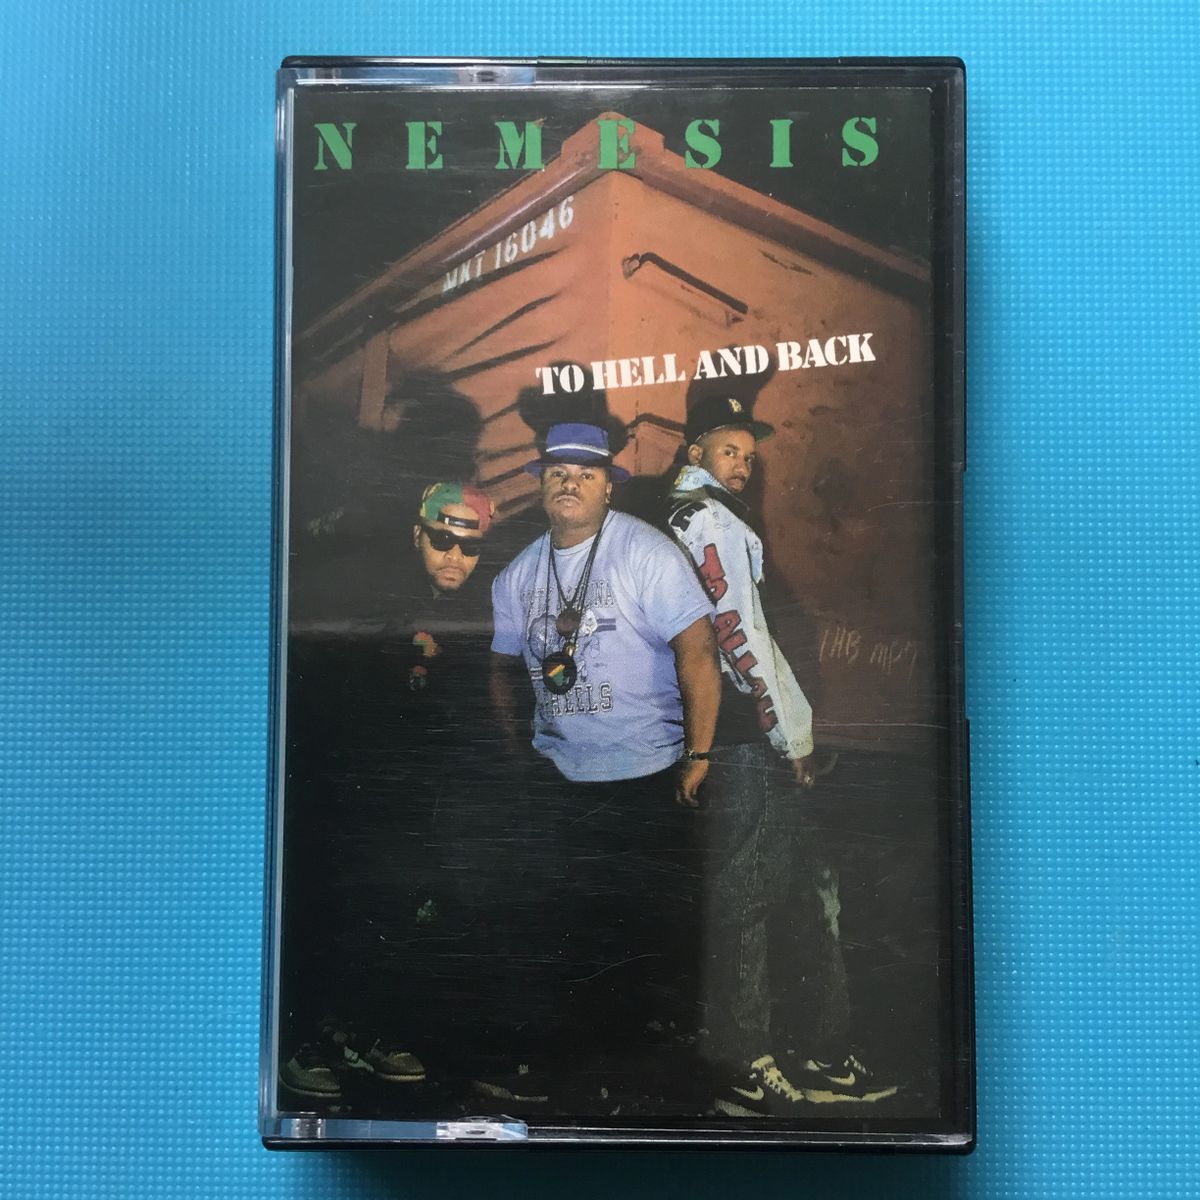 NEMESIS - To Hell And Back - 1990 Cassette Album